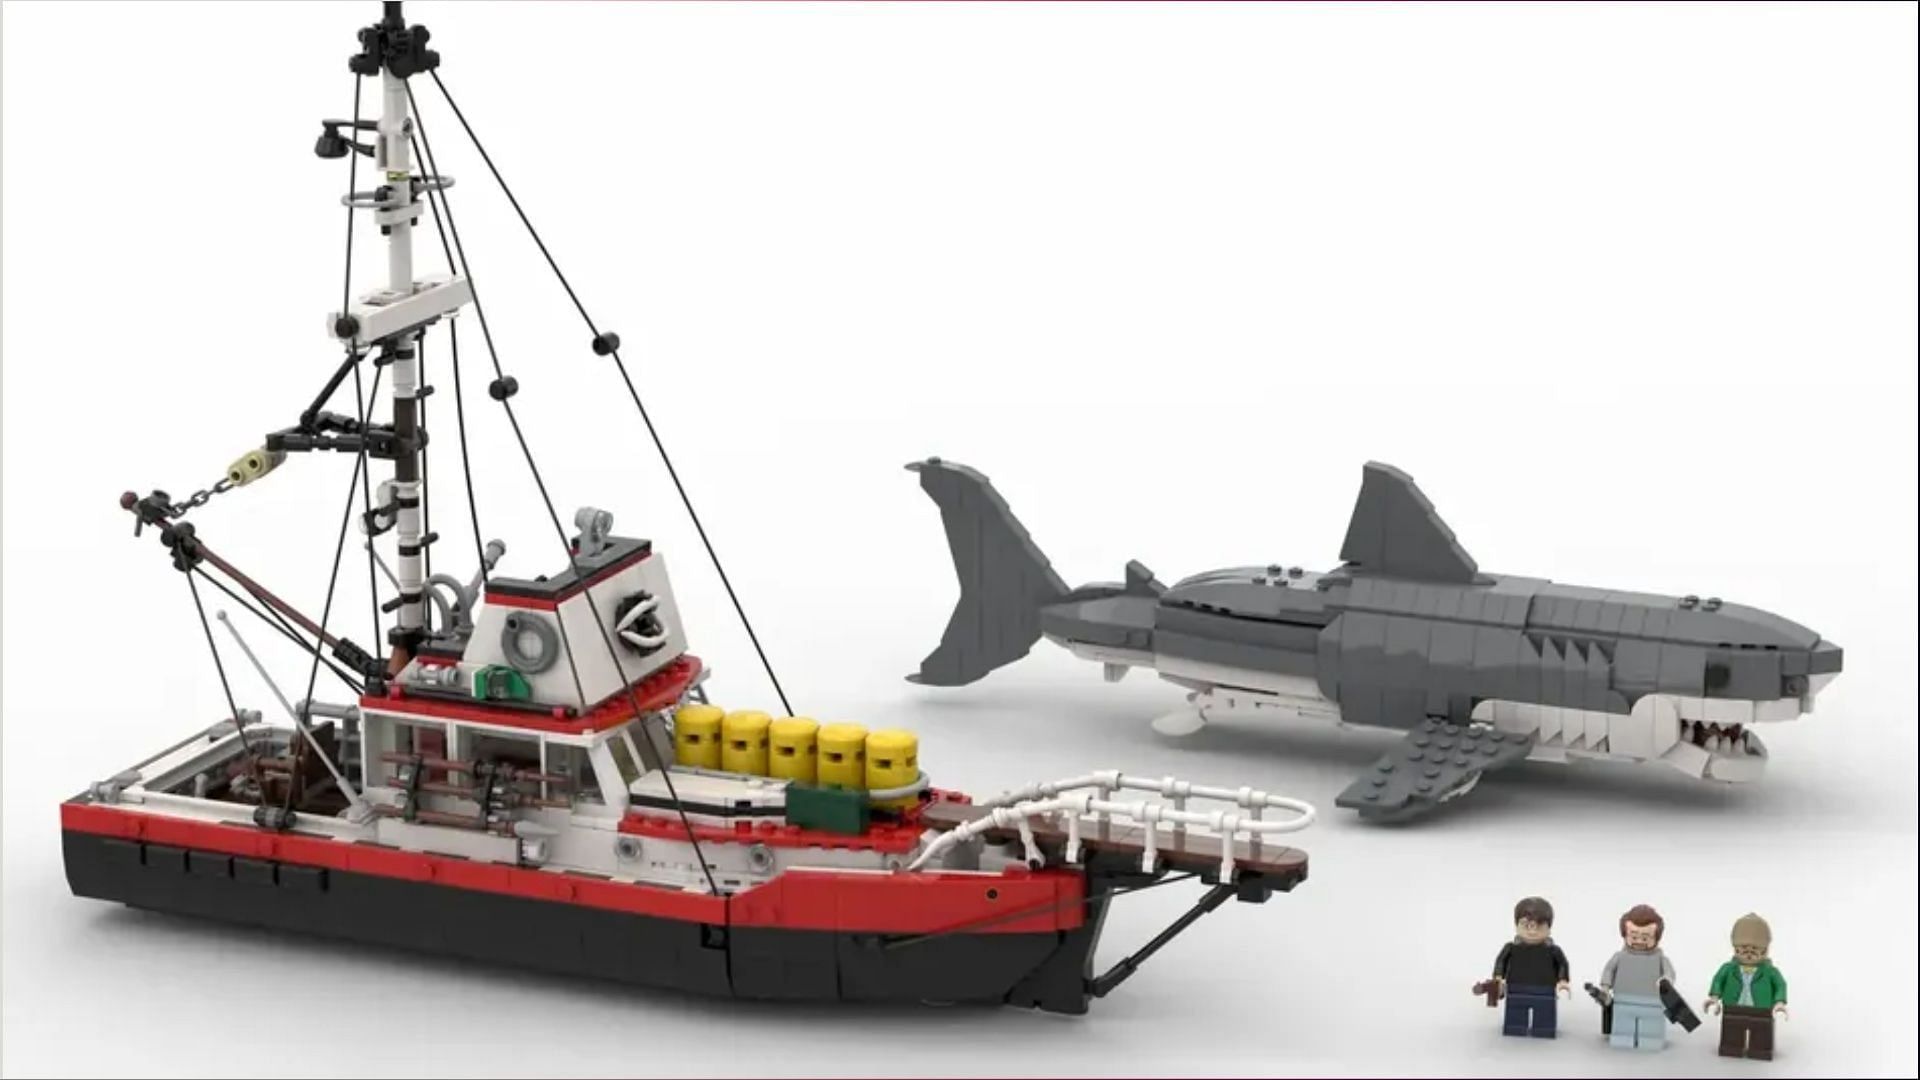 The LEGO Jaws set by fan-designer Jonny Campbell was approved along with a Cat set during the LEGO Ideas 2022 review (Image via LEGO Ideas)